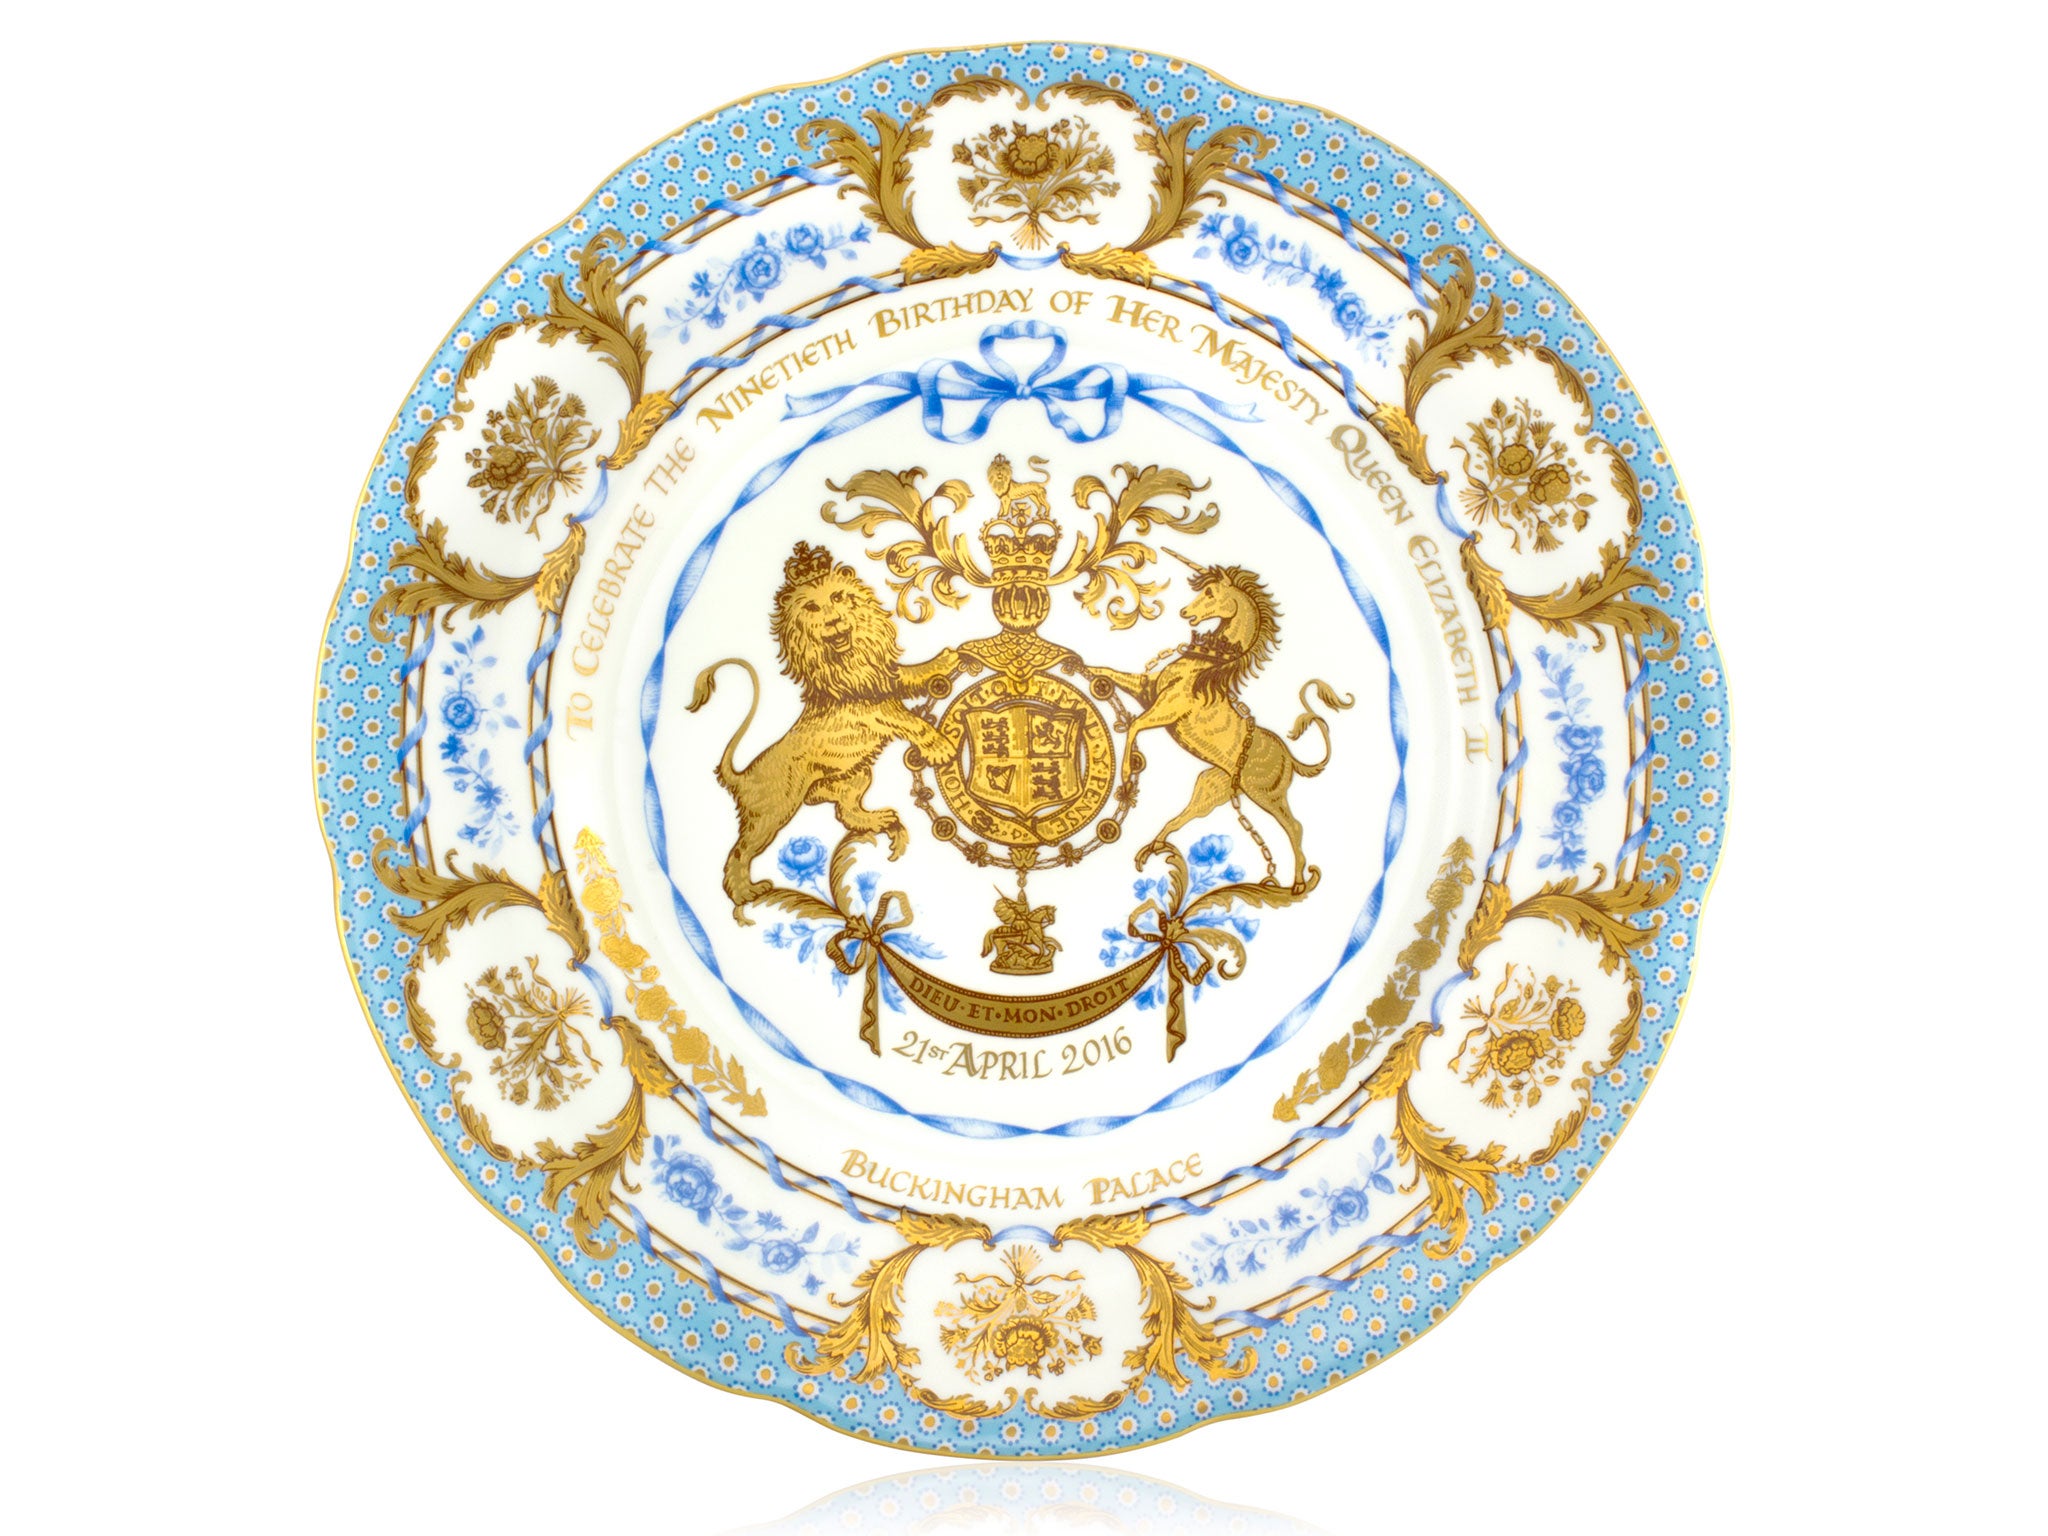 A 10 inch souvenir china plate commemorating the Queen's 90th birthday is part of the official range launched by the Royal Collection Trust